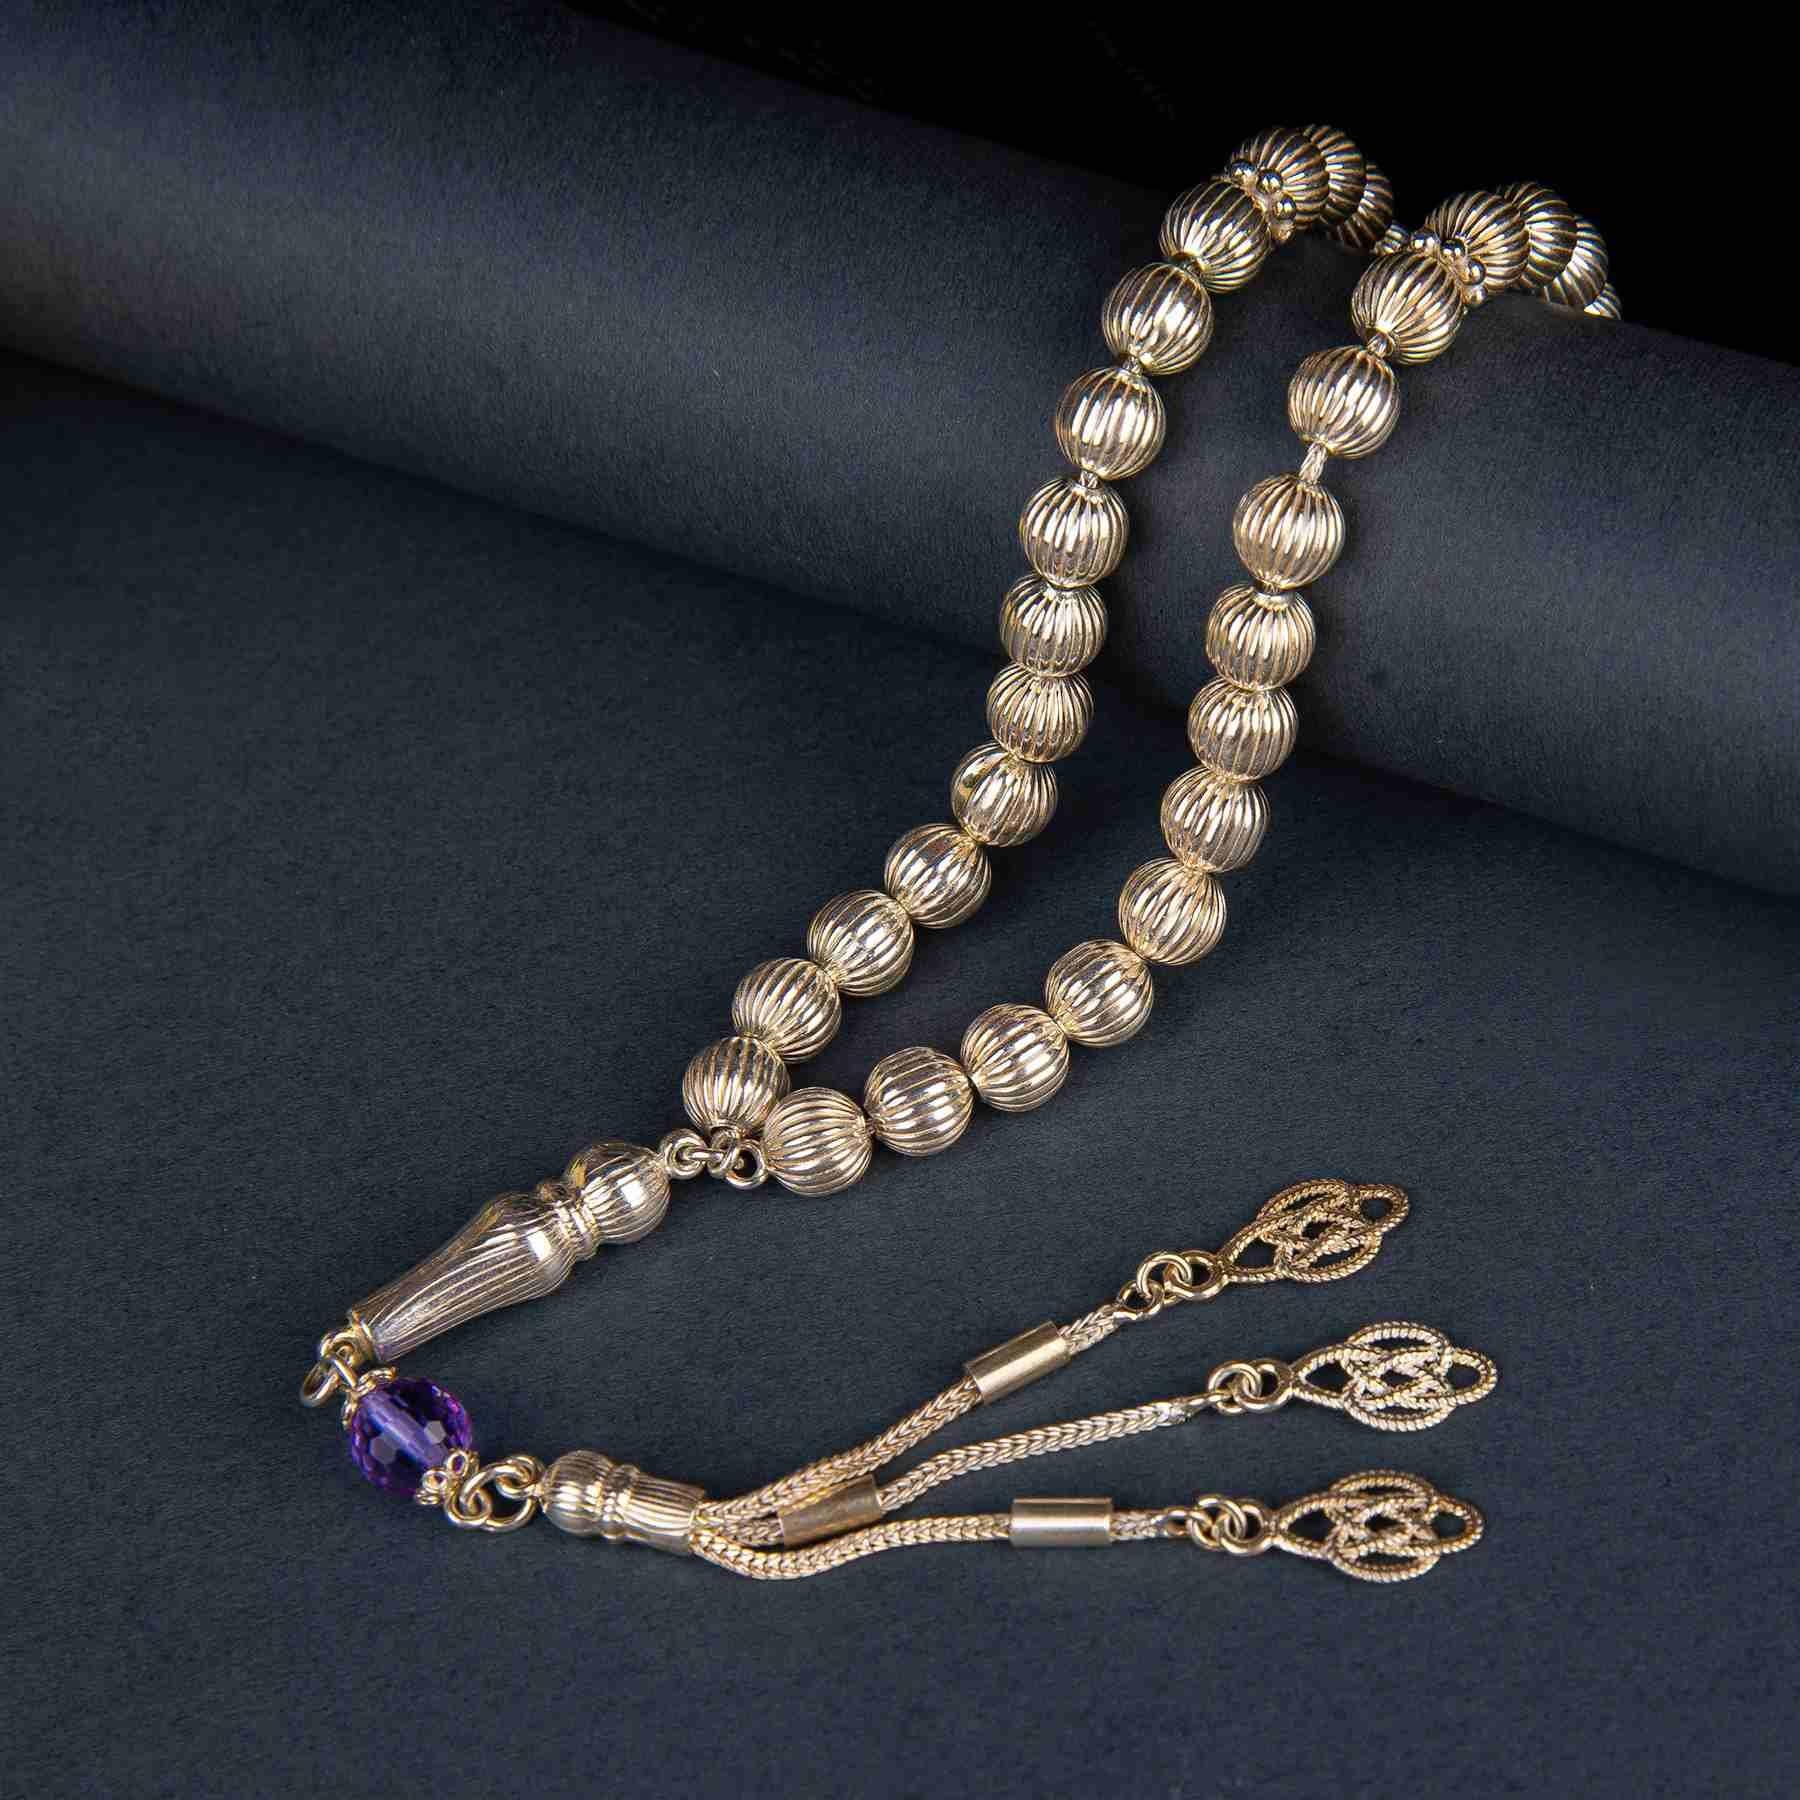 Ve Tesbih Pencil Engraved Sterling Silver Rosary 1